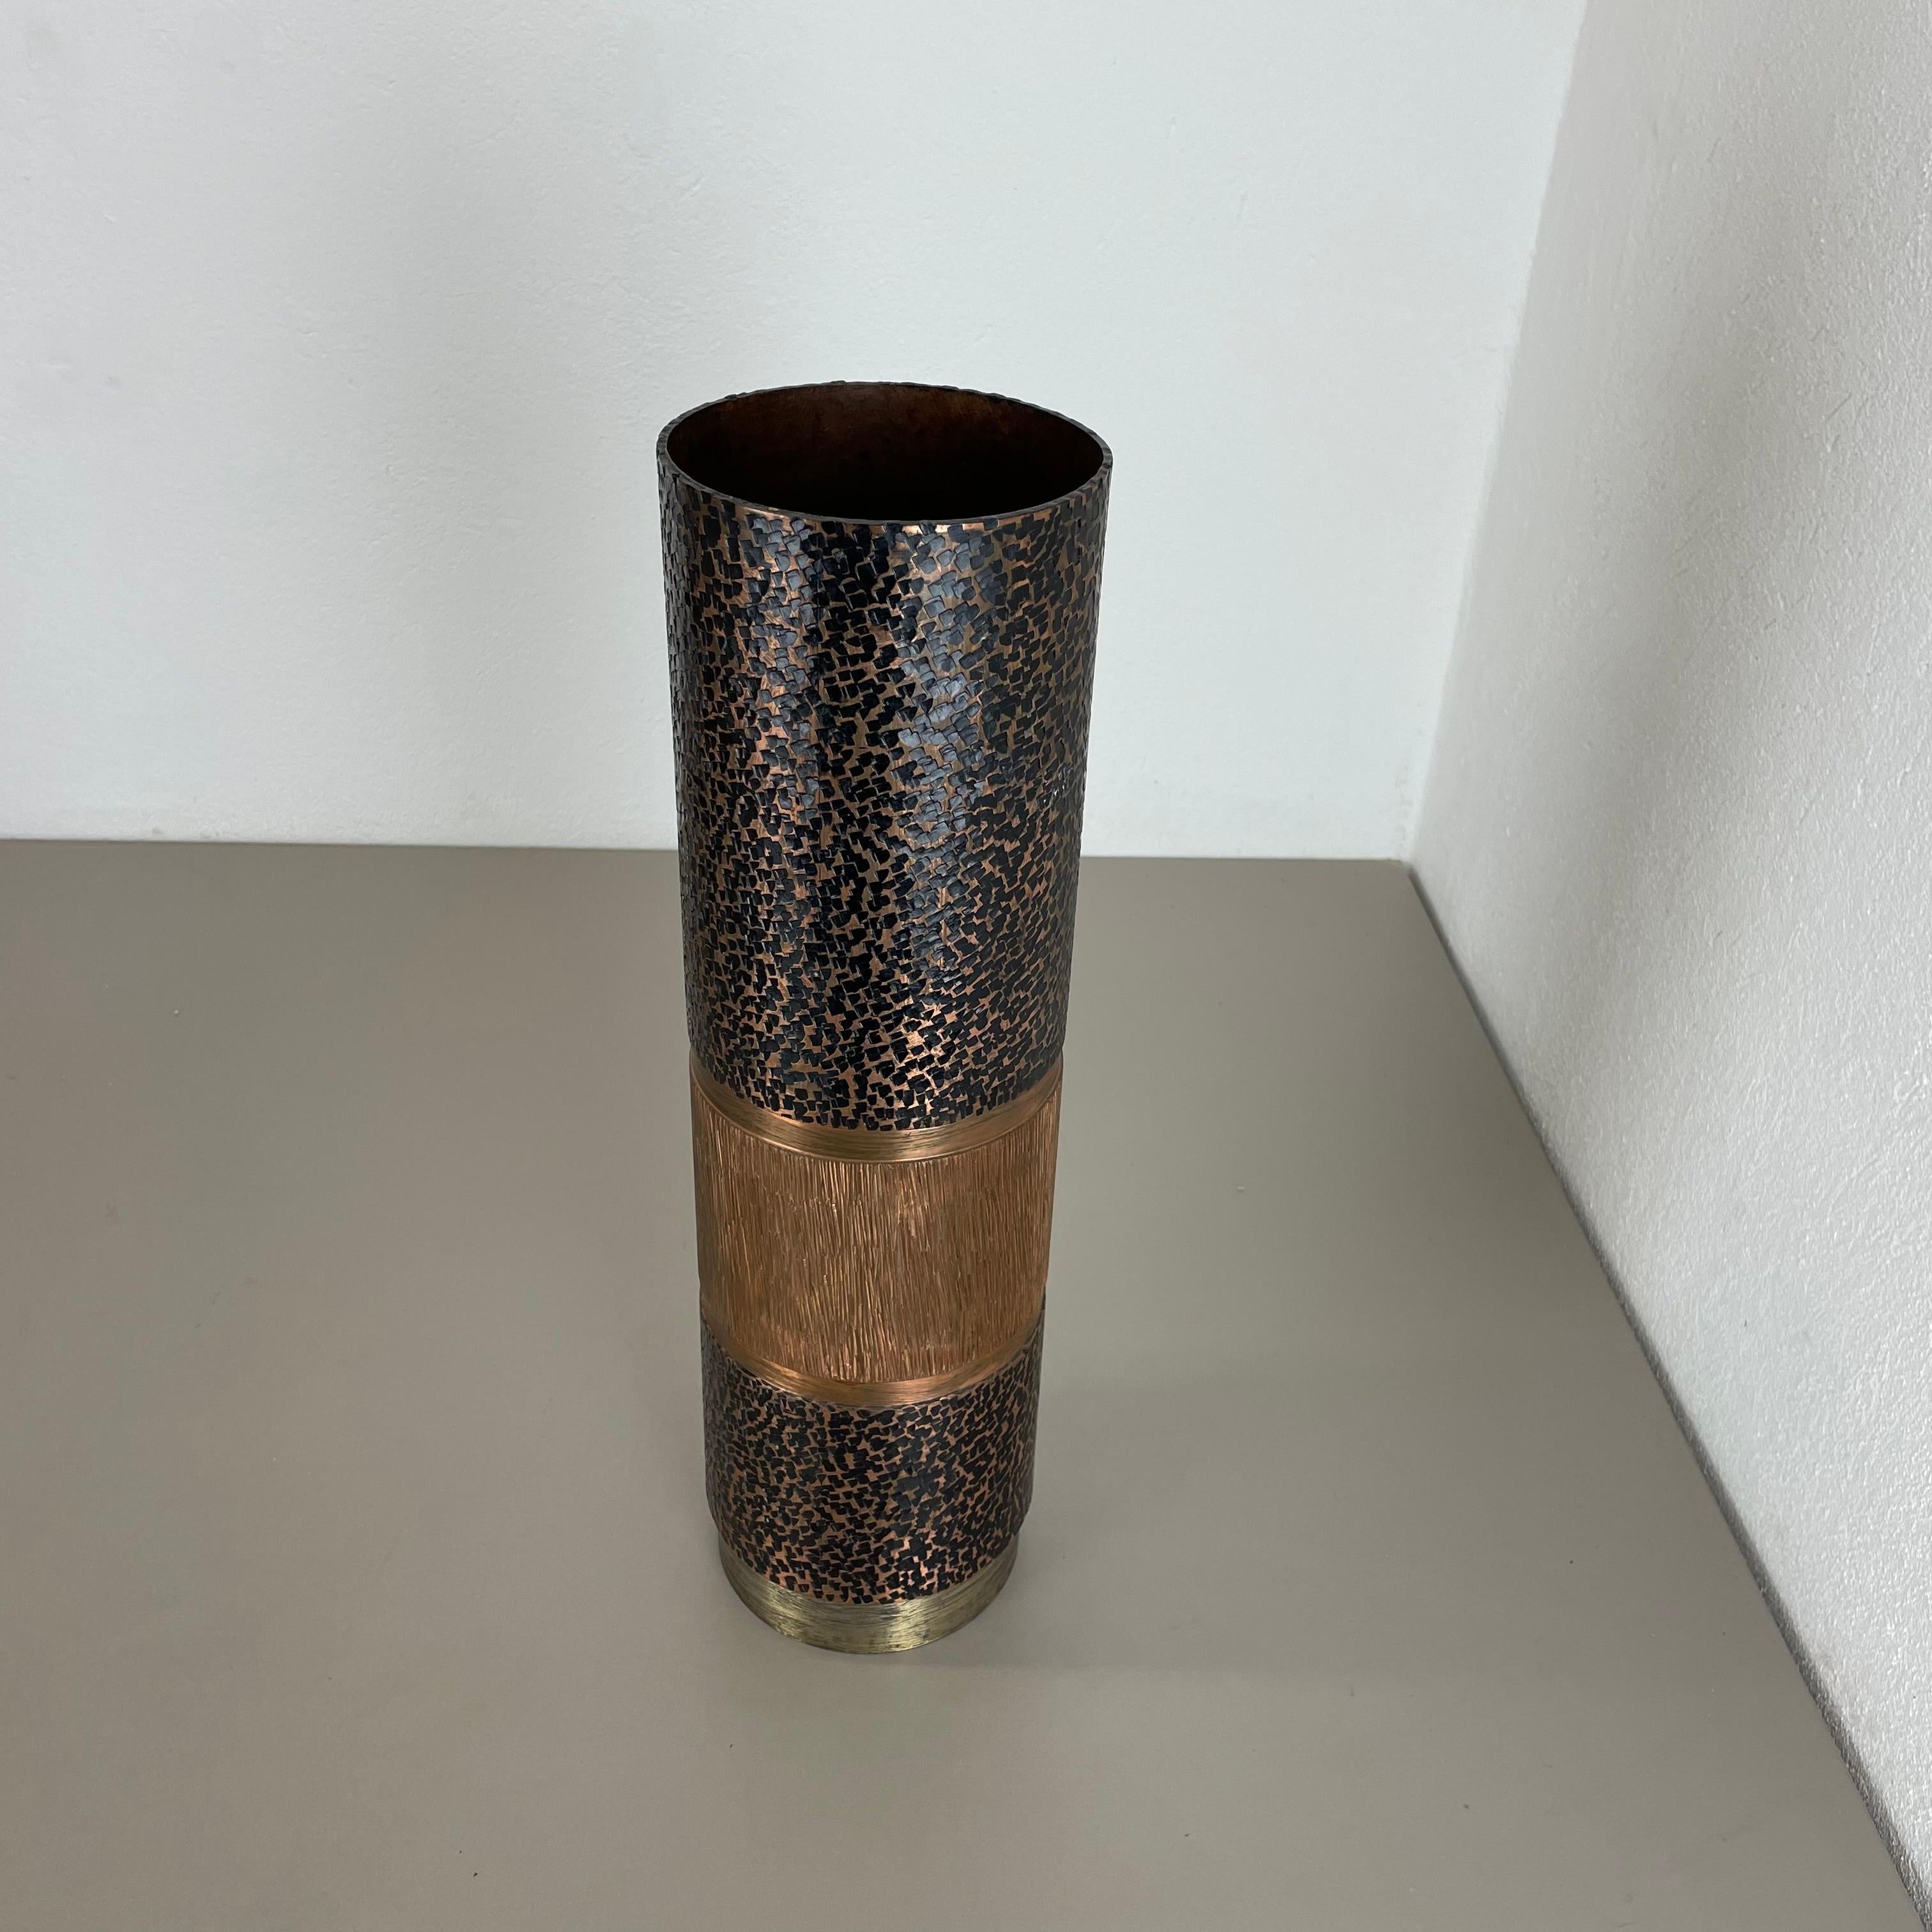 Article:

Brutalist metal vase


Origin:

Germany


Material:

Metal, Brass and copper


Decade:

1970s


Description:

This original modernist vintage vase, was produced in the 1970s in Germany. It is made of metal, brass on